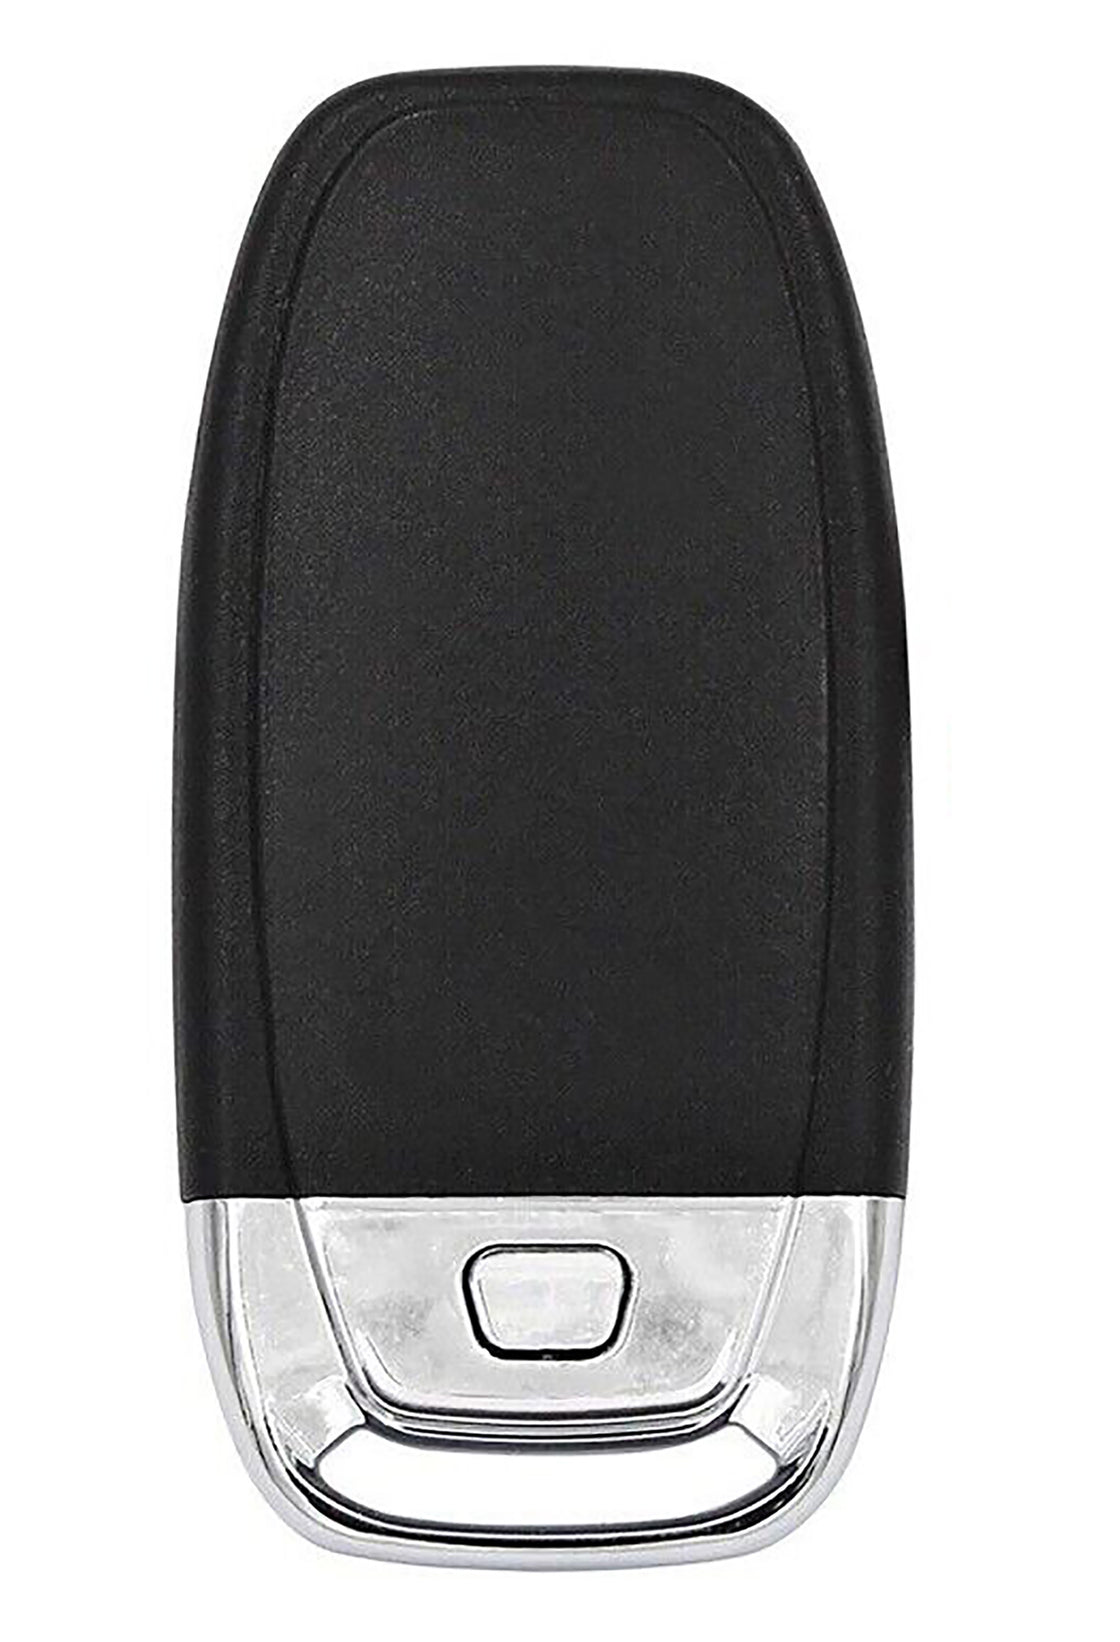 1x New Quality Replacement Comfort Access Key Fob Remote Compatible with & Fit For Audi Vehicle - MPN IYZFBSB802-02